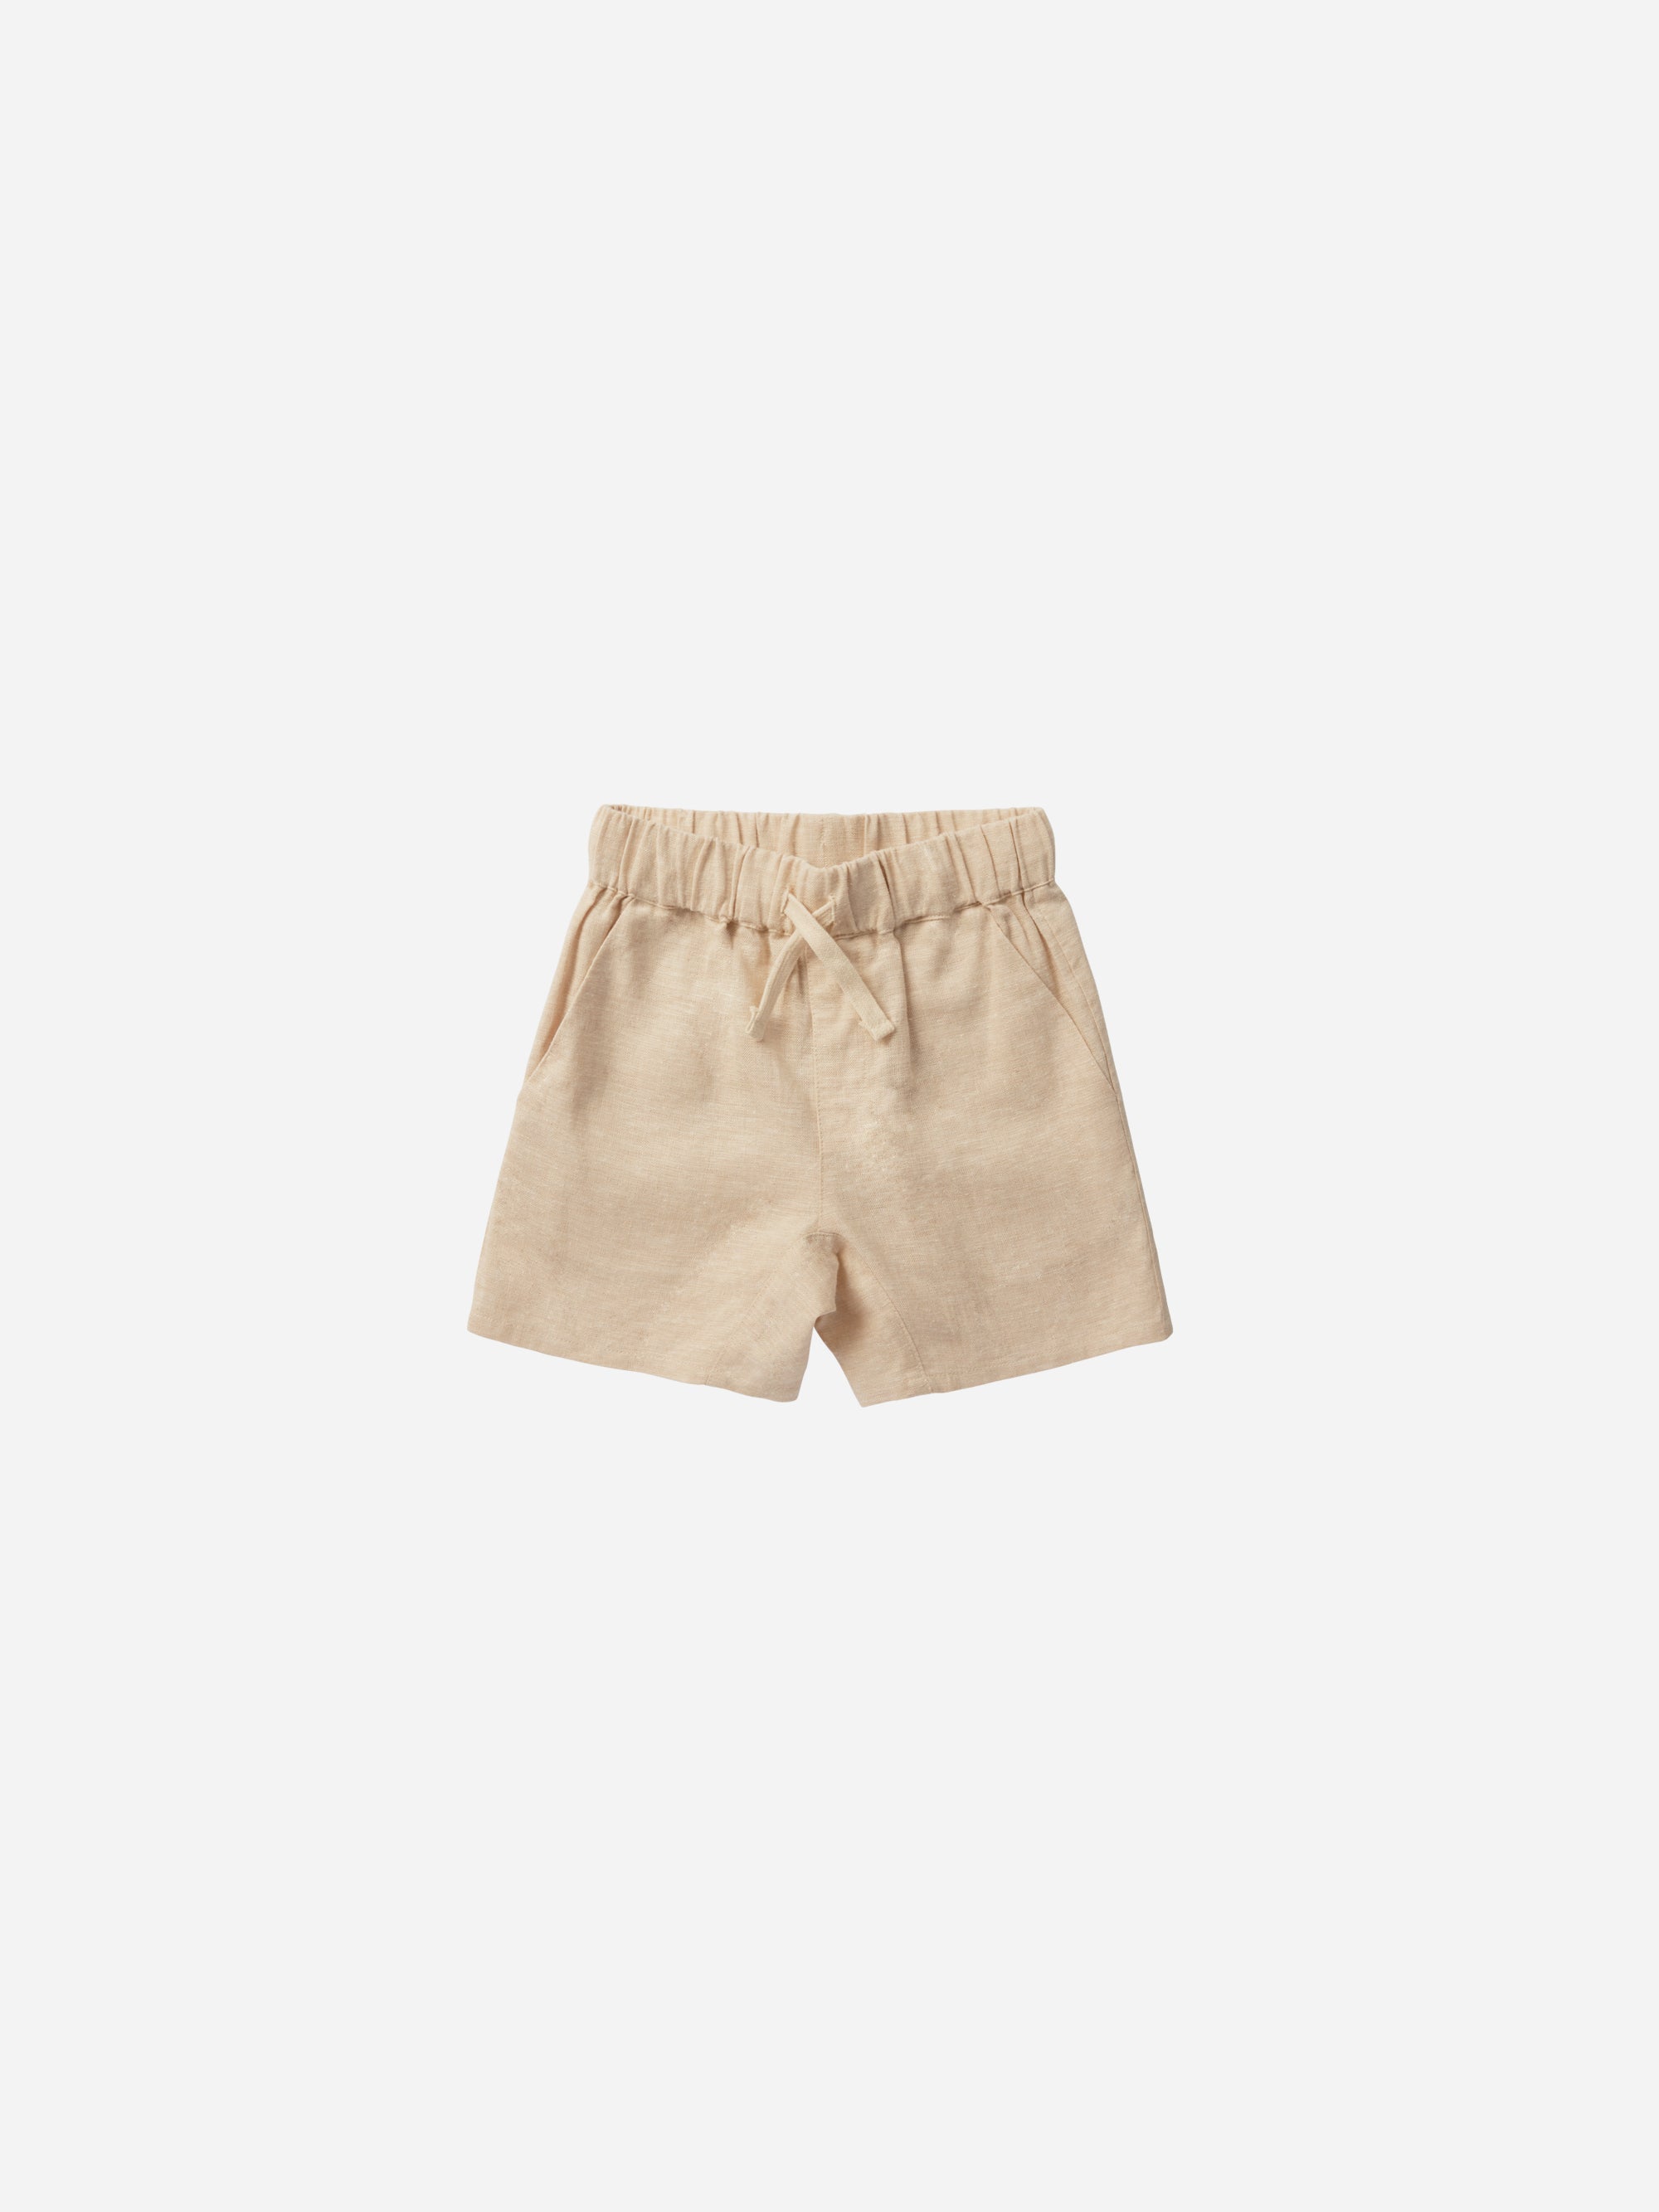 Bermuda Short || Heathered Sand - Rylee + Cru | Kids Clothes | Trendy Baby Clothes | Modern Infant Outfits |